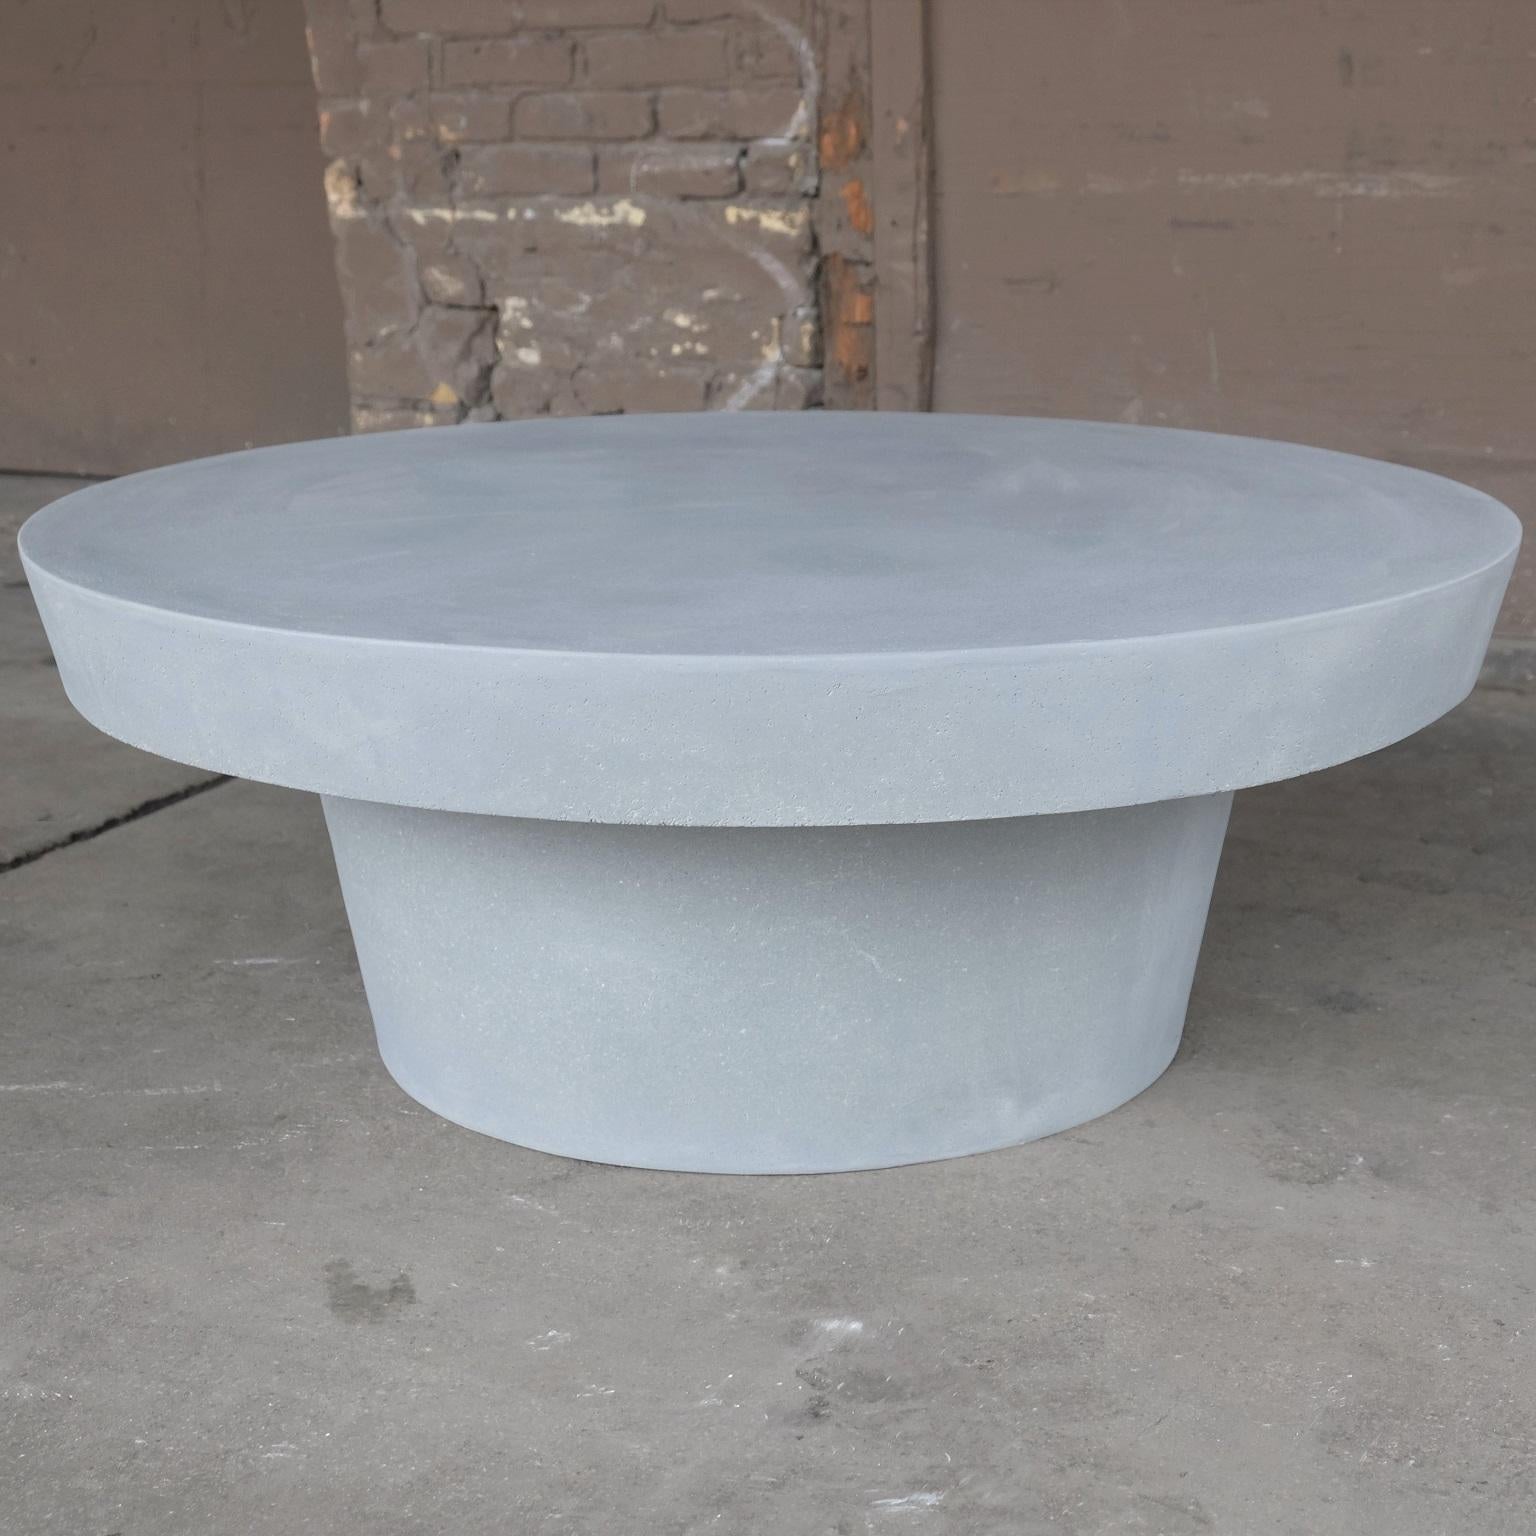 A place of balance and equilibrium. A smooth, beveled edge gently guides the eye around the form, showcasing its fields of stone aggregate.

Dimensions: Diameter 42 in. (107 cm), height 16 in. (41 cm). Weight 80 lbs. (36 kg).

Finish color